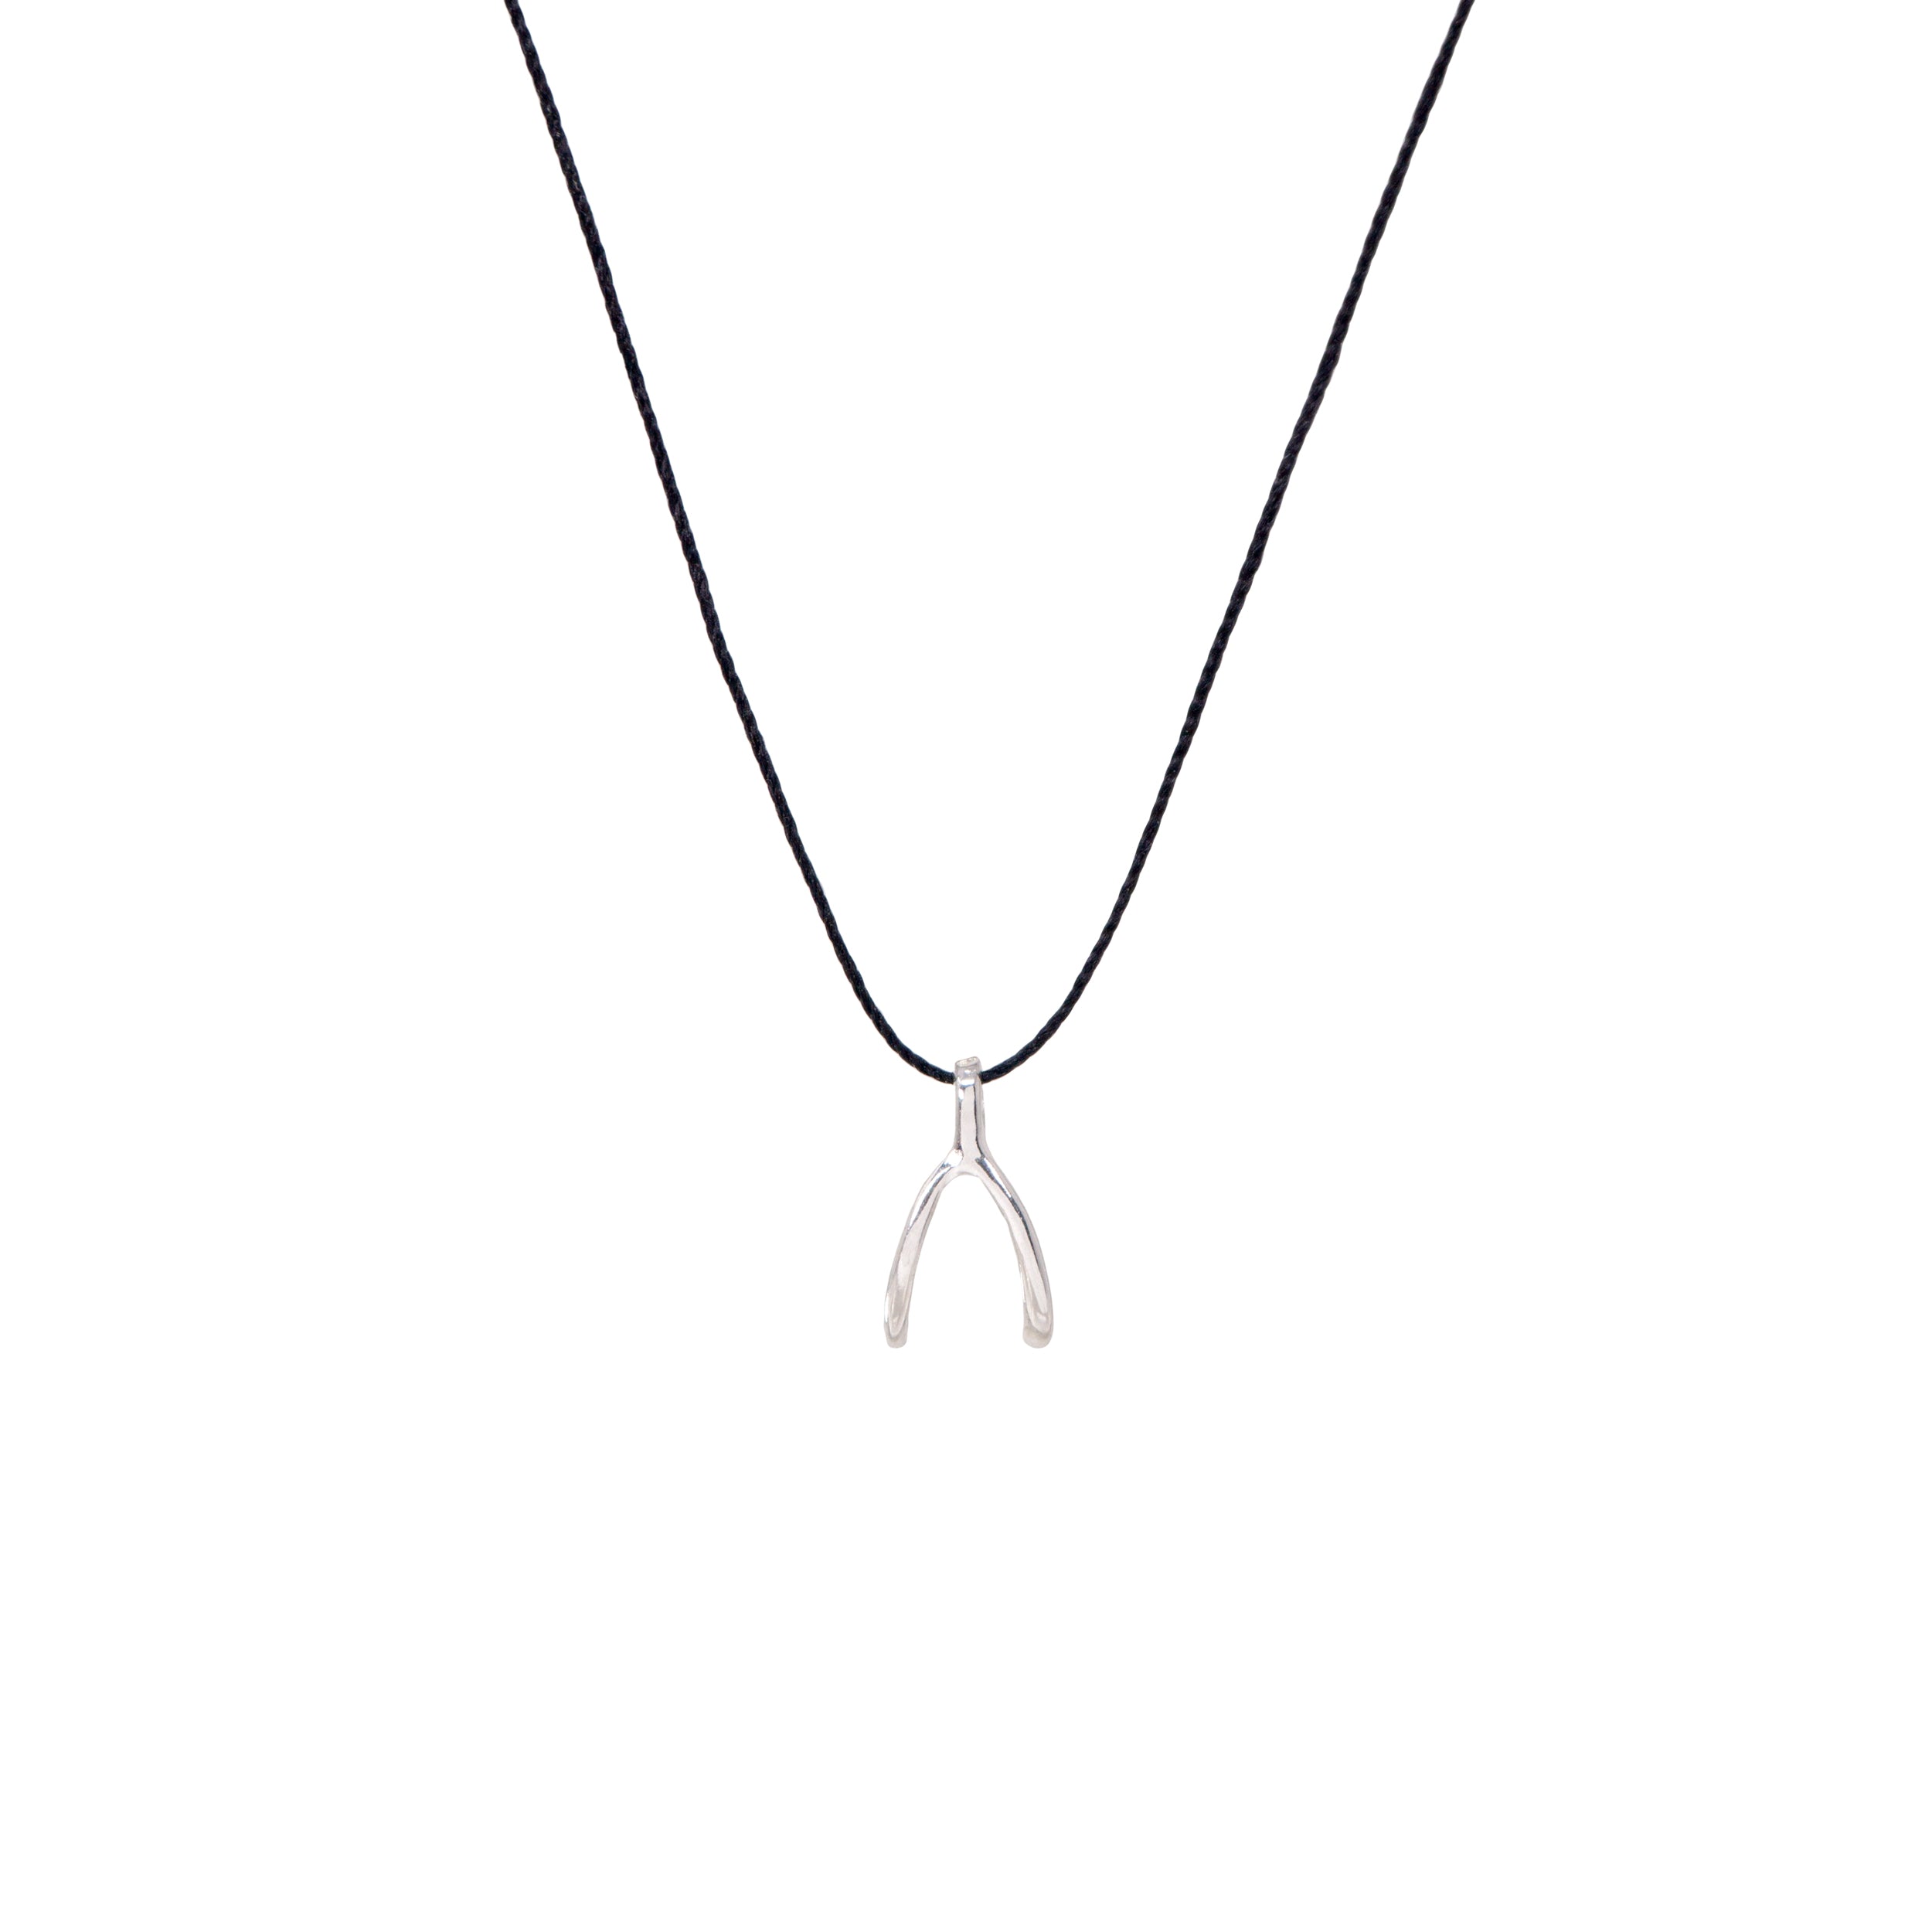 Buy Silver Wishbone Necklace with Evil Eye Charm in Silver ...